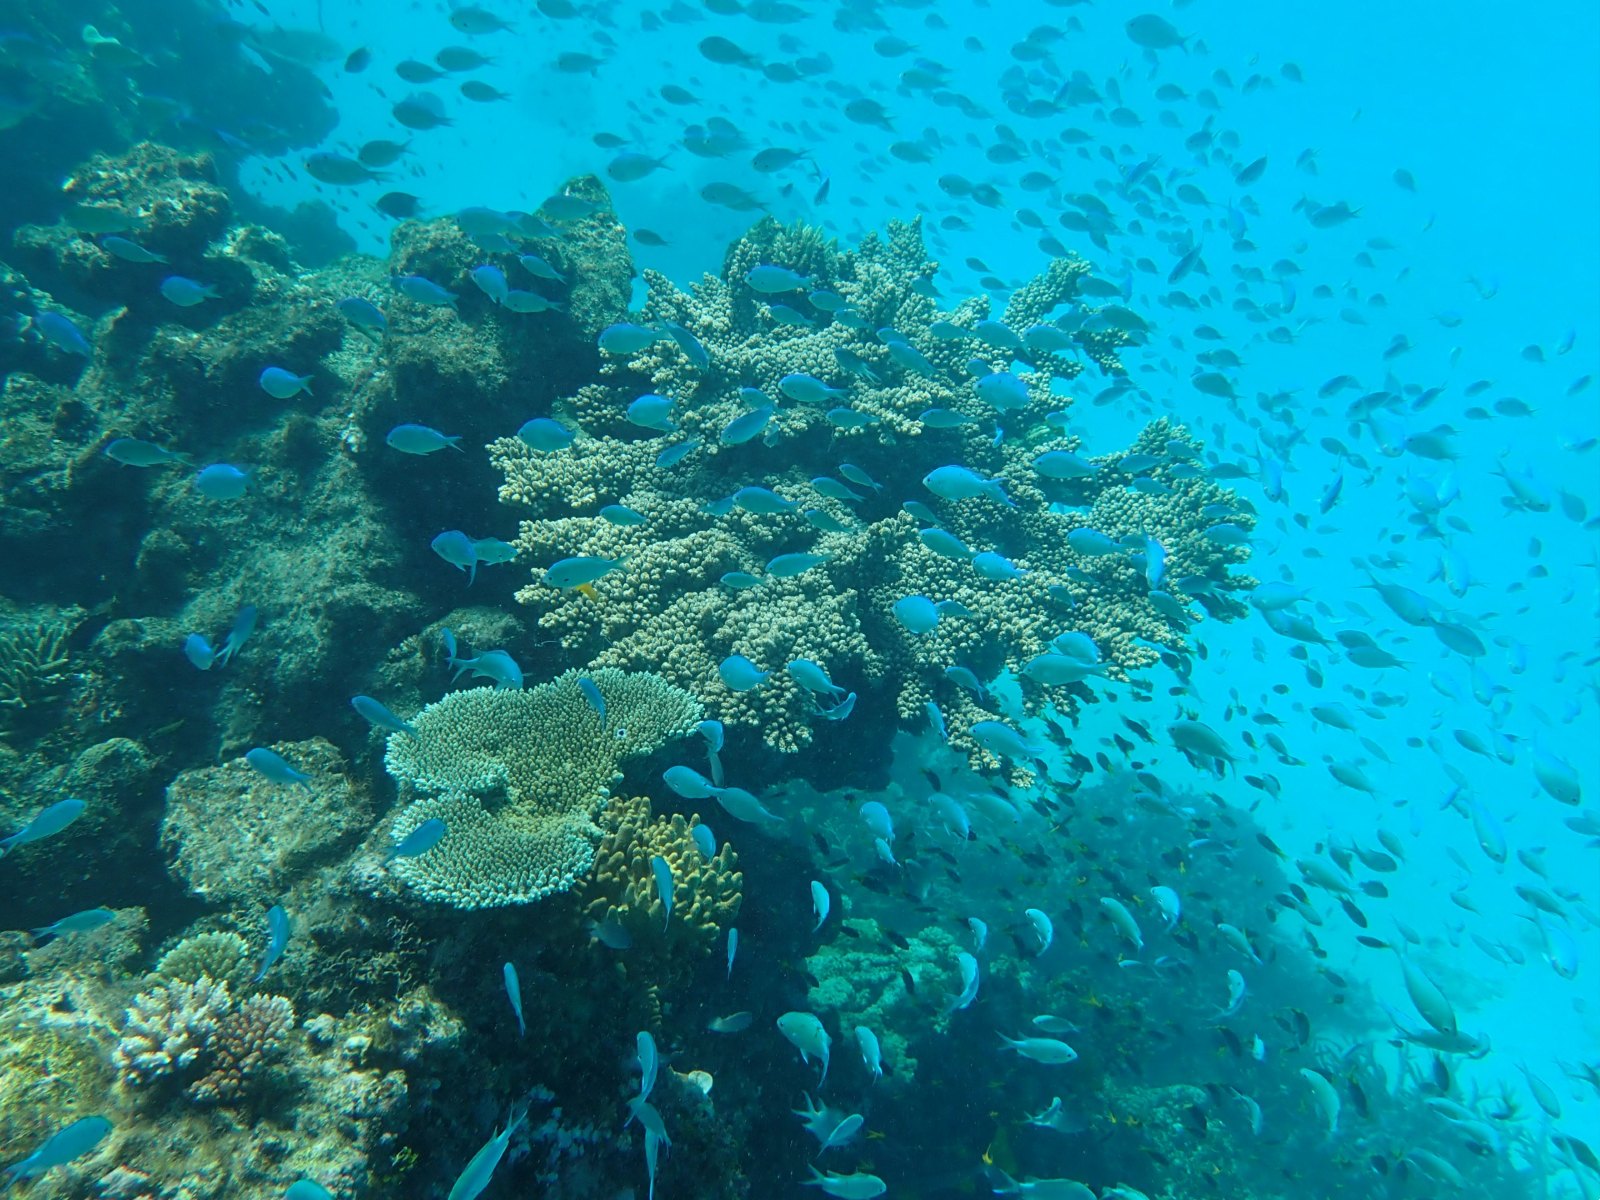 Coral and fish in the water.